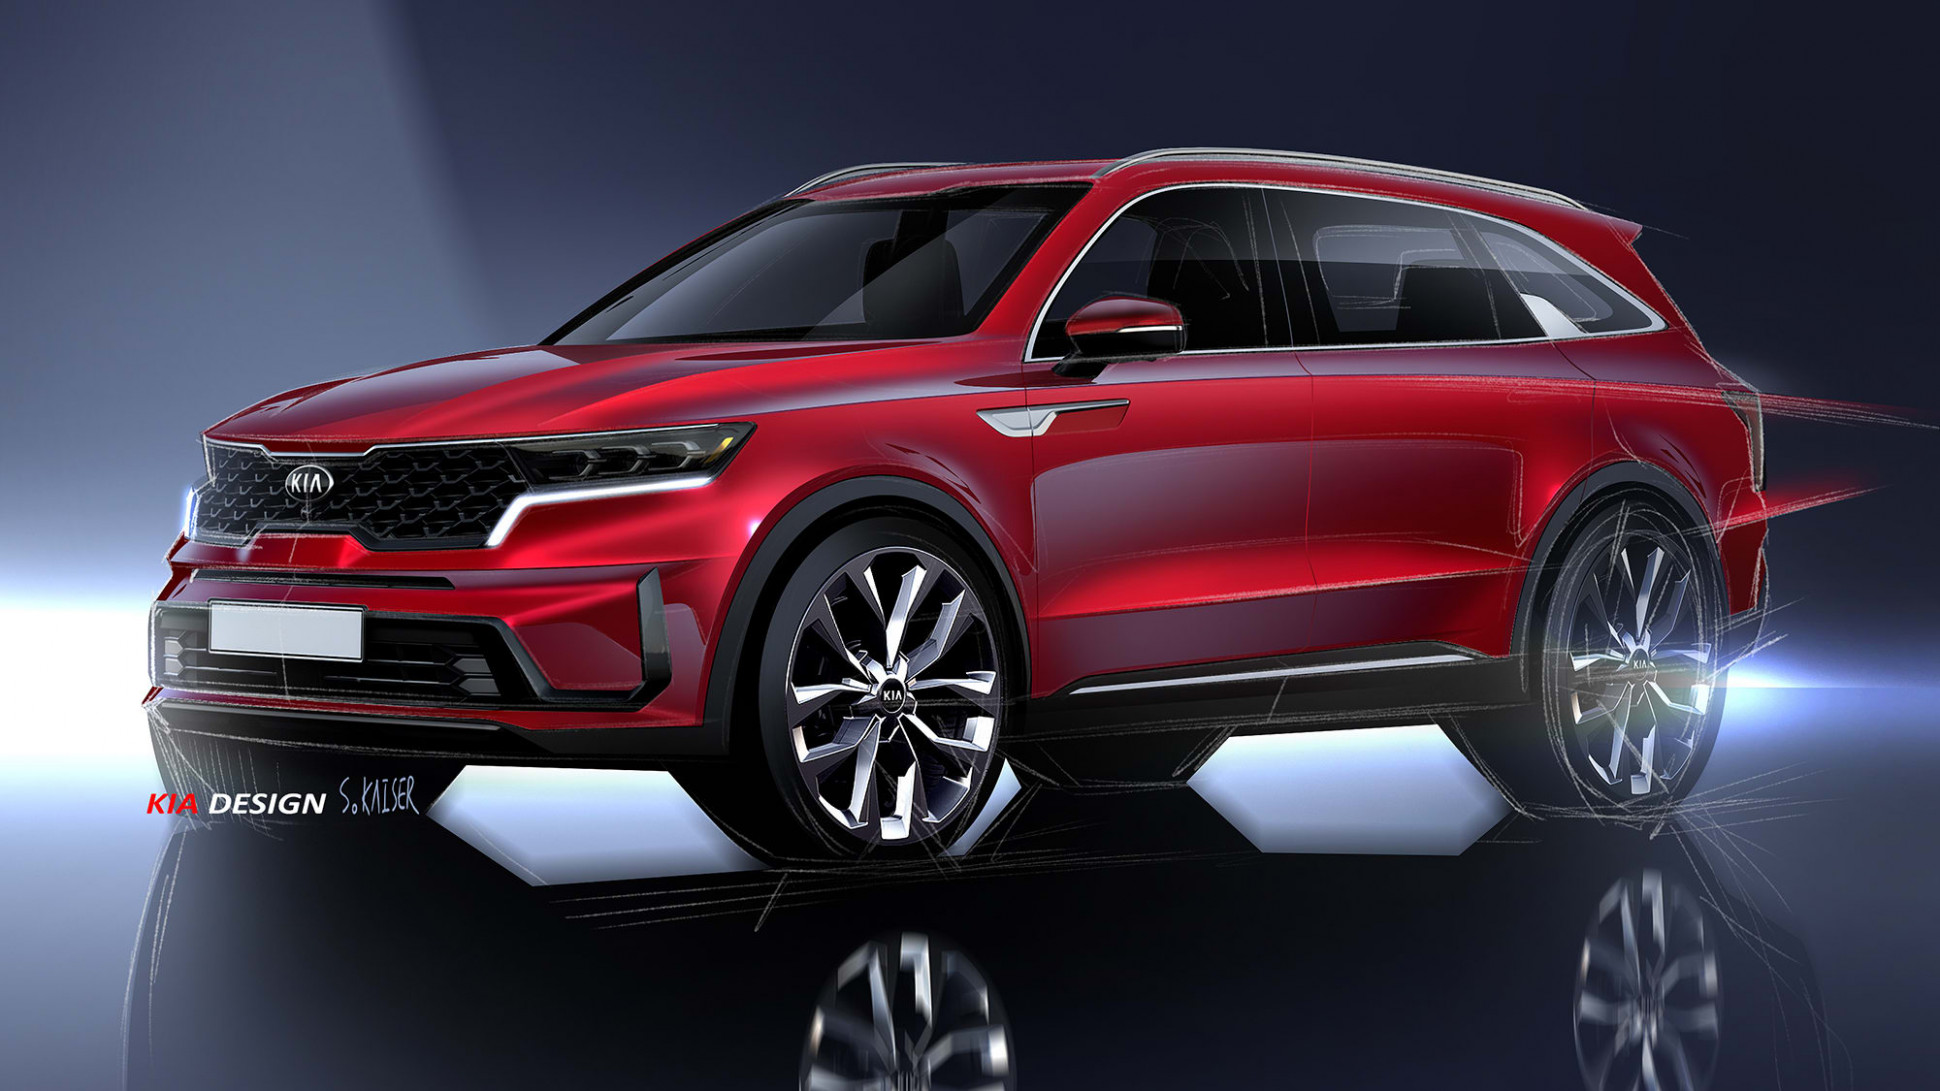 Spesification When Does 2022 Kia Sorento Come Out | New Cars Design